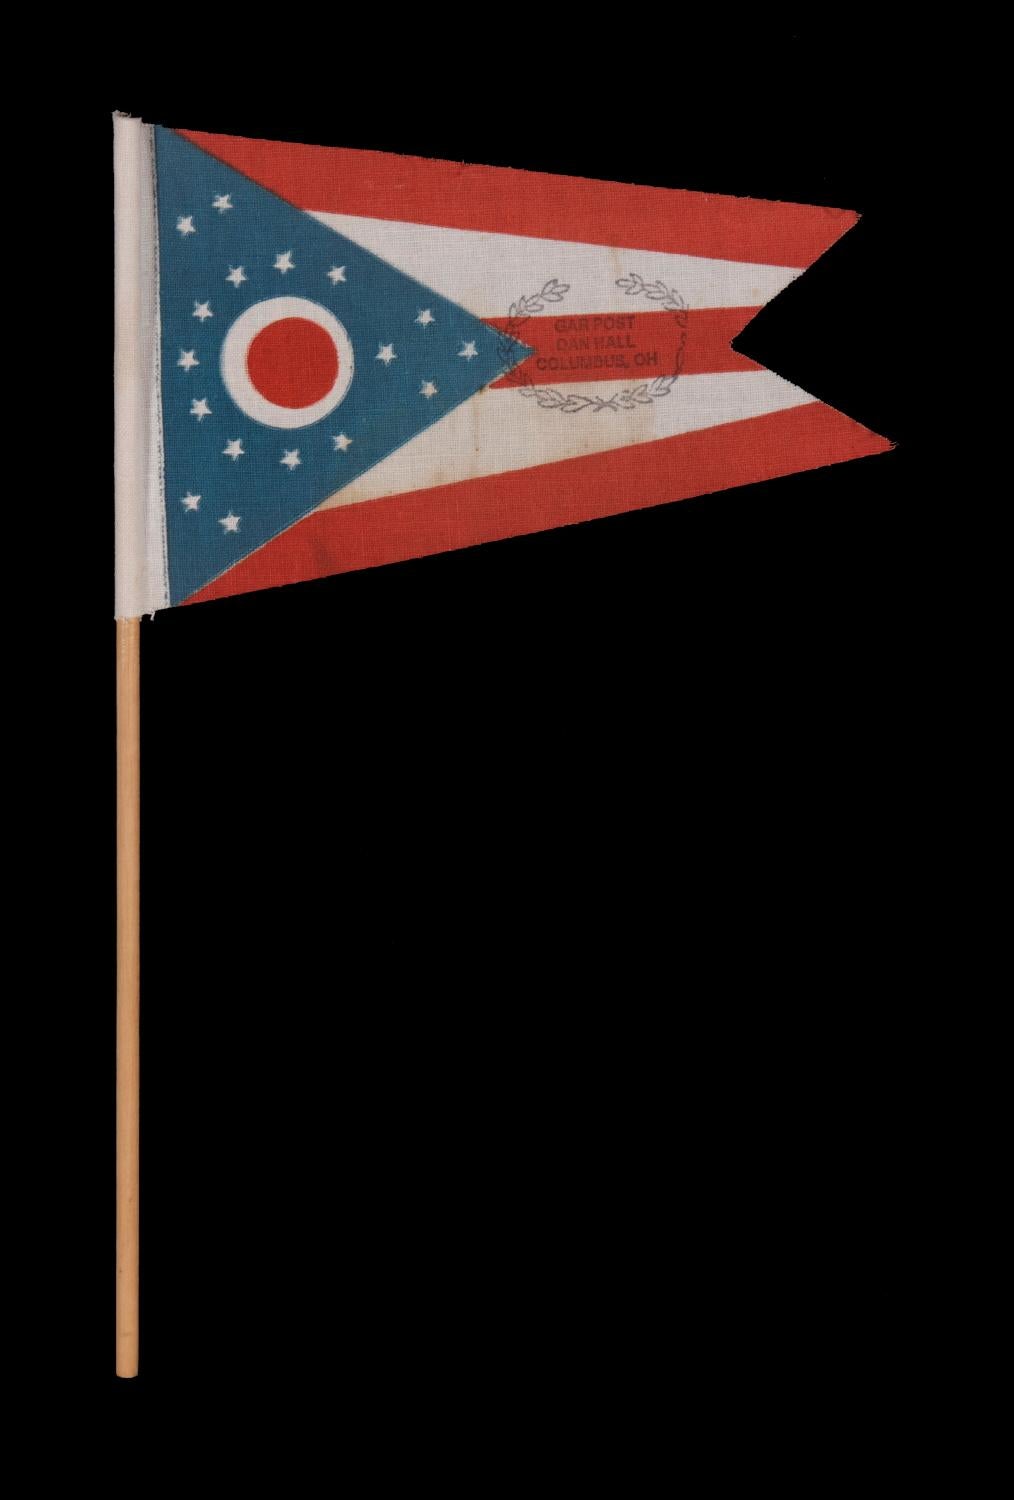 OHIO STATE FLAG WITH CIVIL WAR VETERANS' OVERPRINT FROM THE GRAND ARMY OF THE REPUBLIC POST IN COLUMBUS, MADE IN MOURNING OF THE 1925 PASSING OF NATIONAL G.A.R. COMMANDER IN CHIEF DANIEL M. HALL, WHO ALSO SERVED AS COMMANDER OF THE OHIO DEPARTMENT